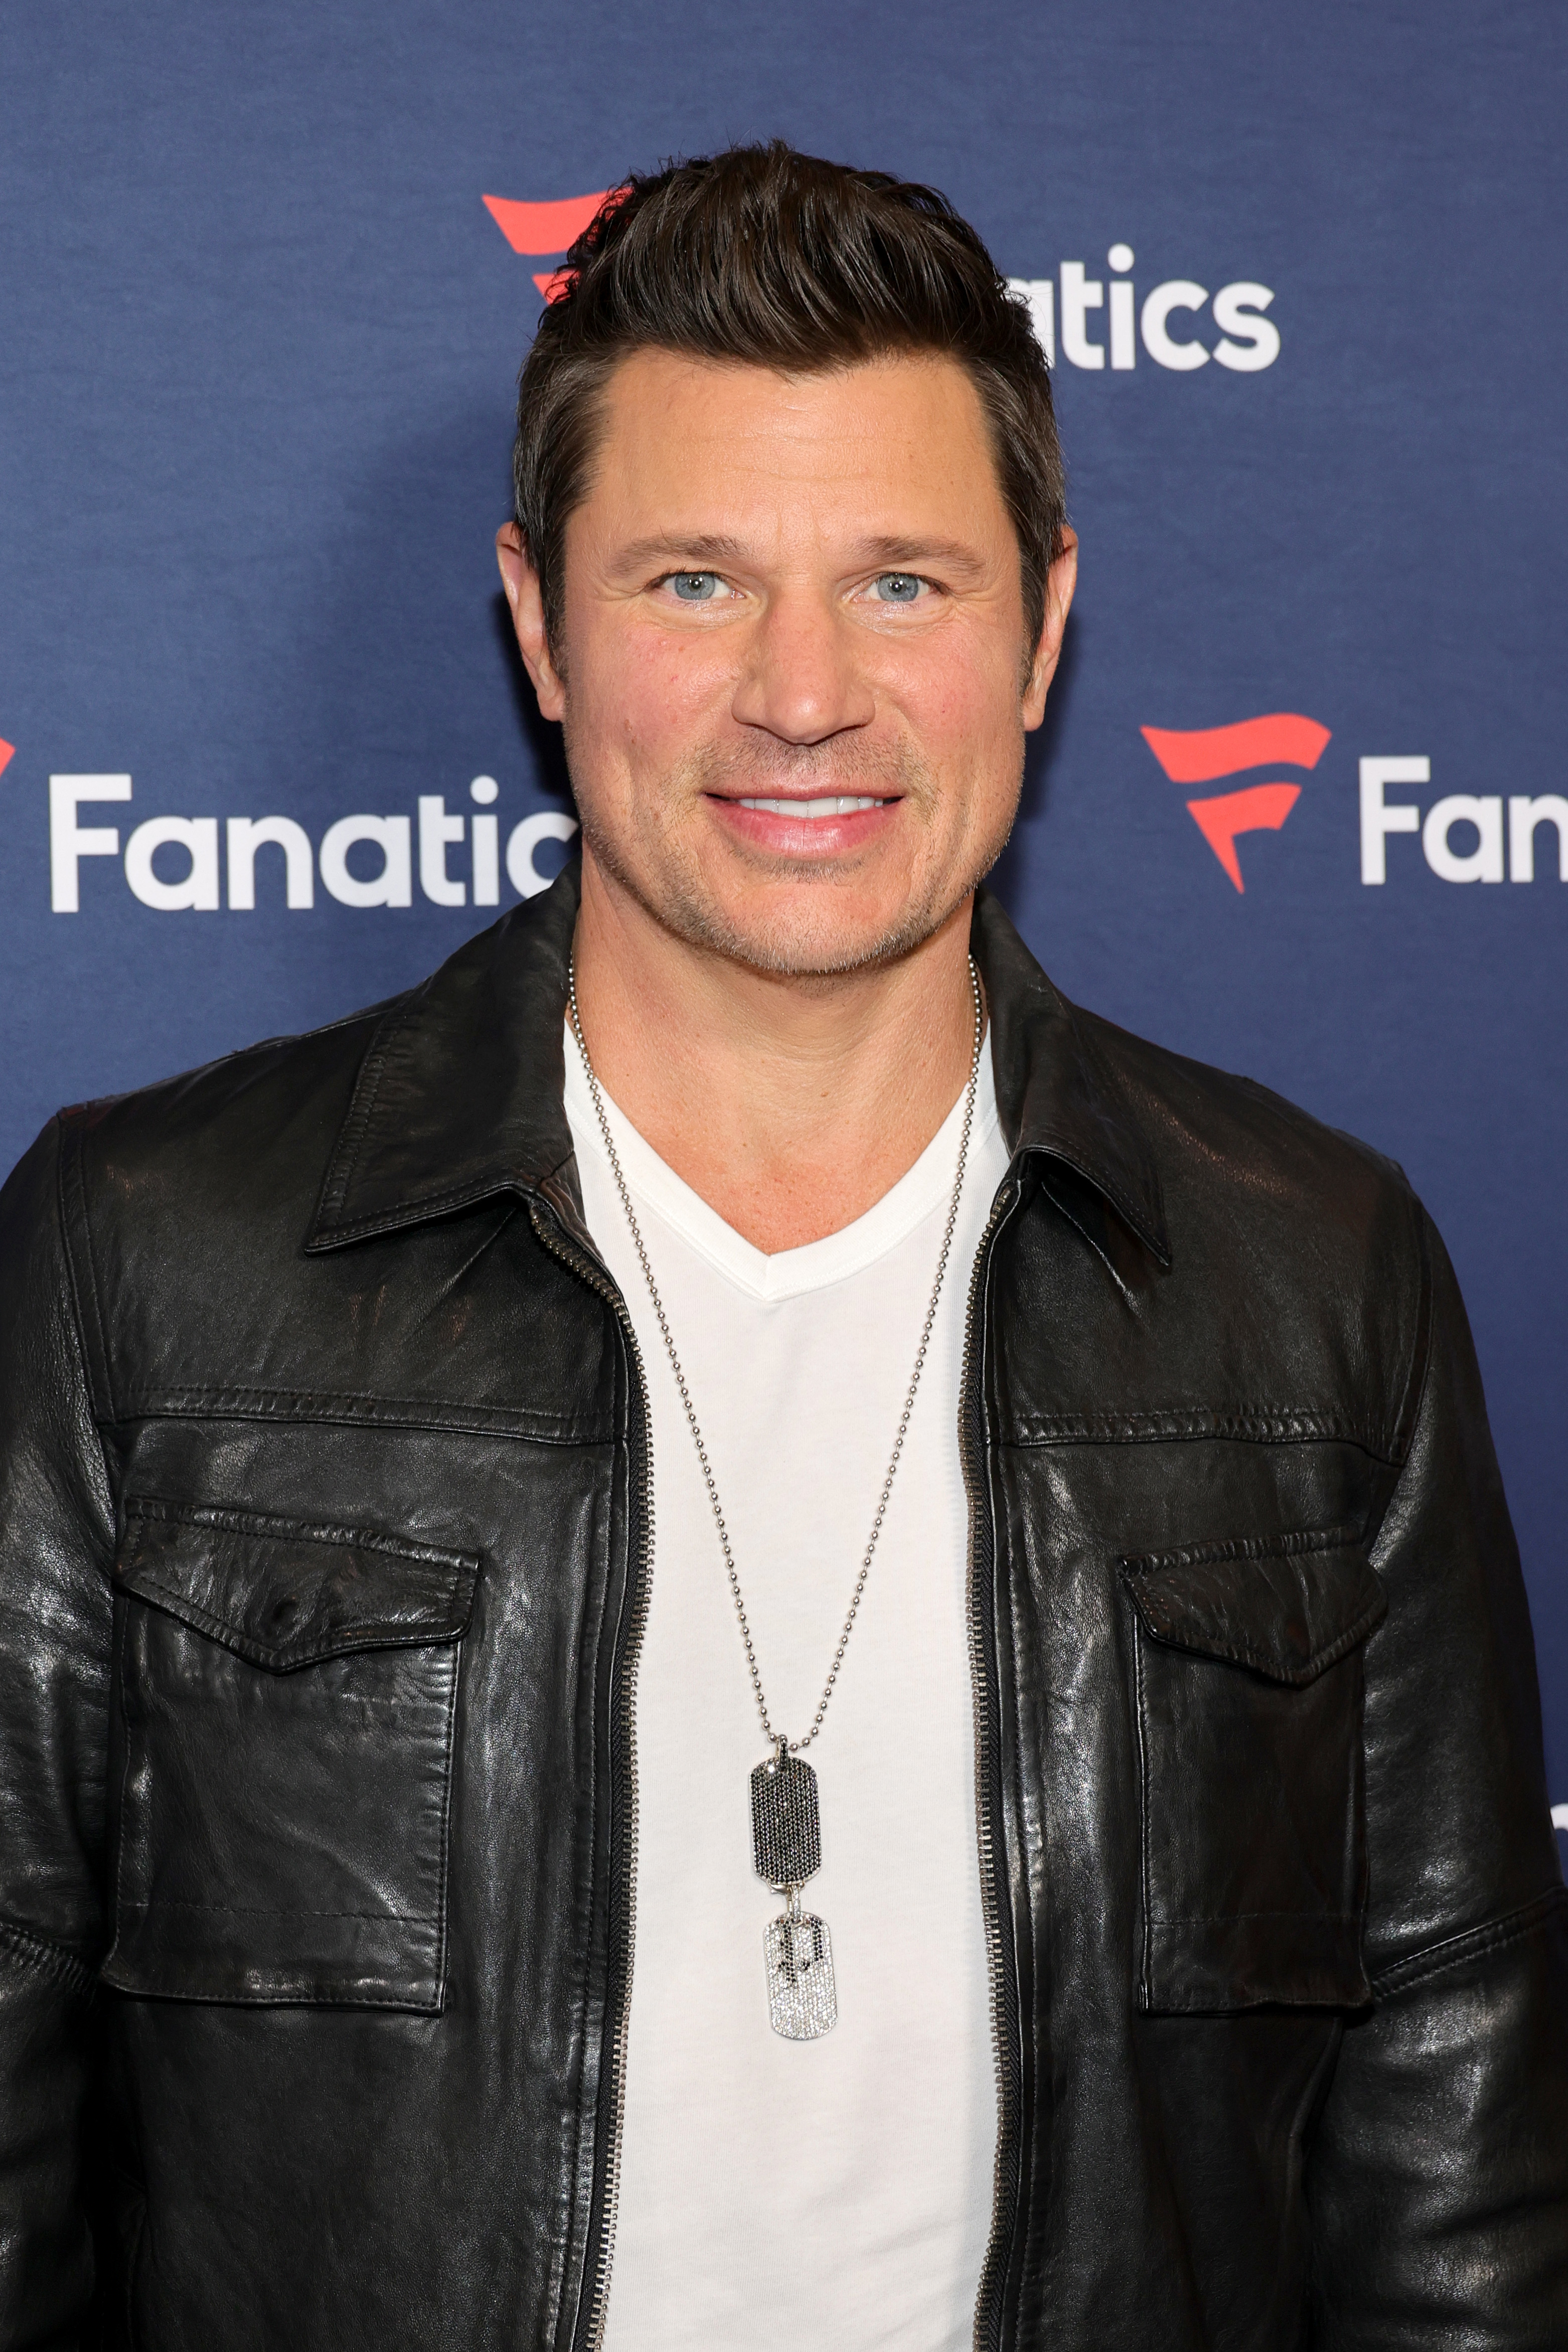 Nick Lachey wearing a leather jacket and white shirt, standing against a promotional backdrop